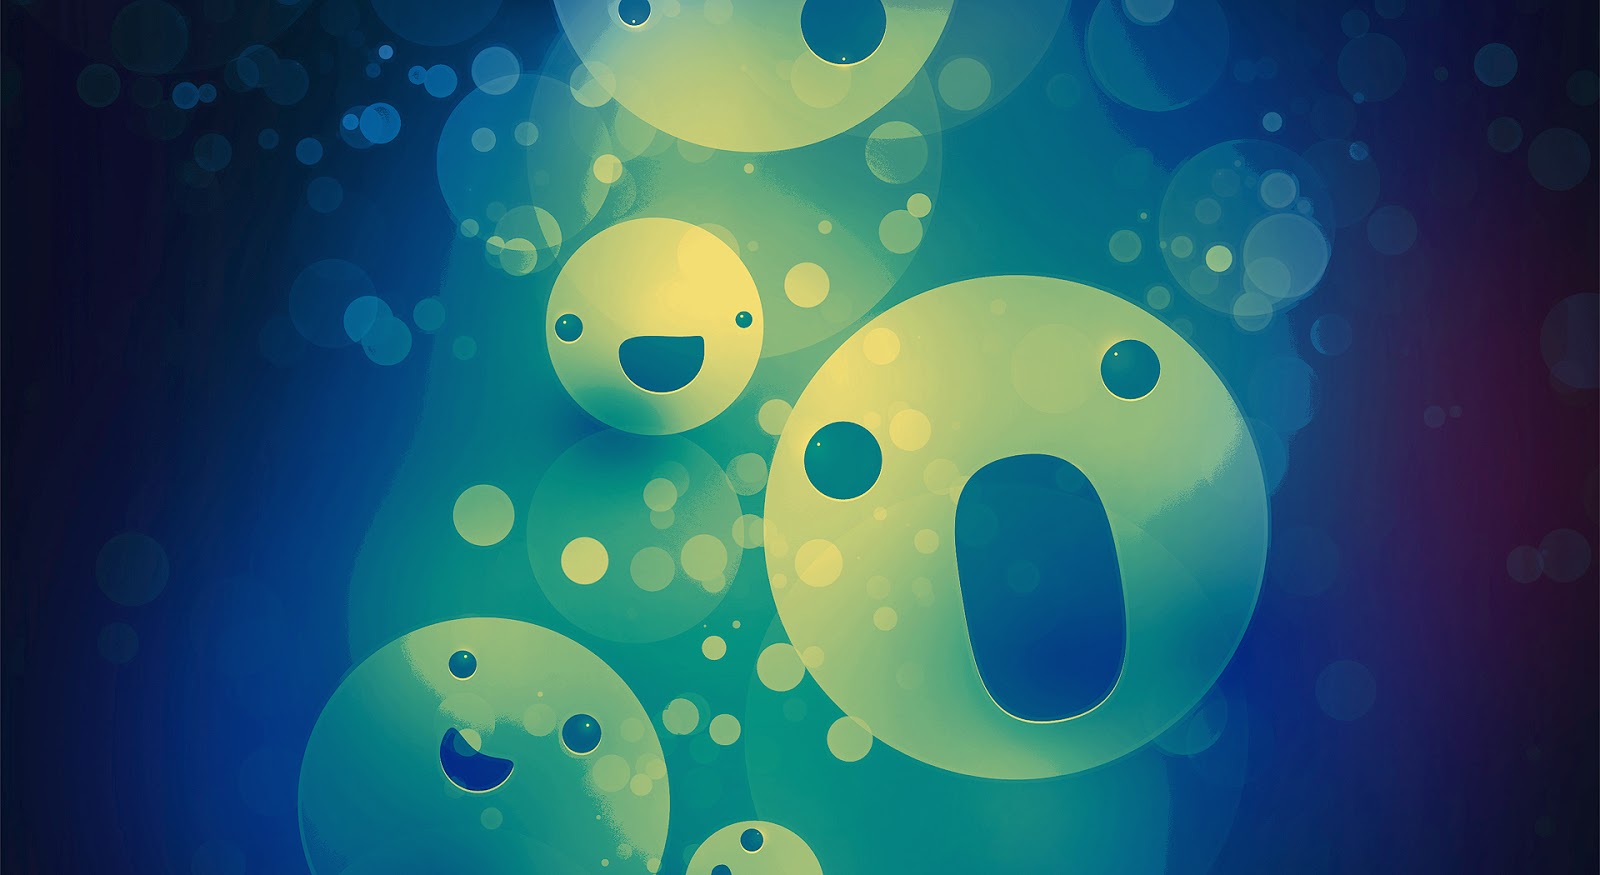 cute smiley abstract graphics design wallpaperjpg